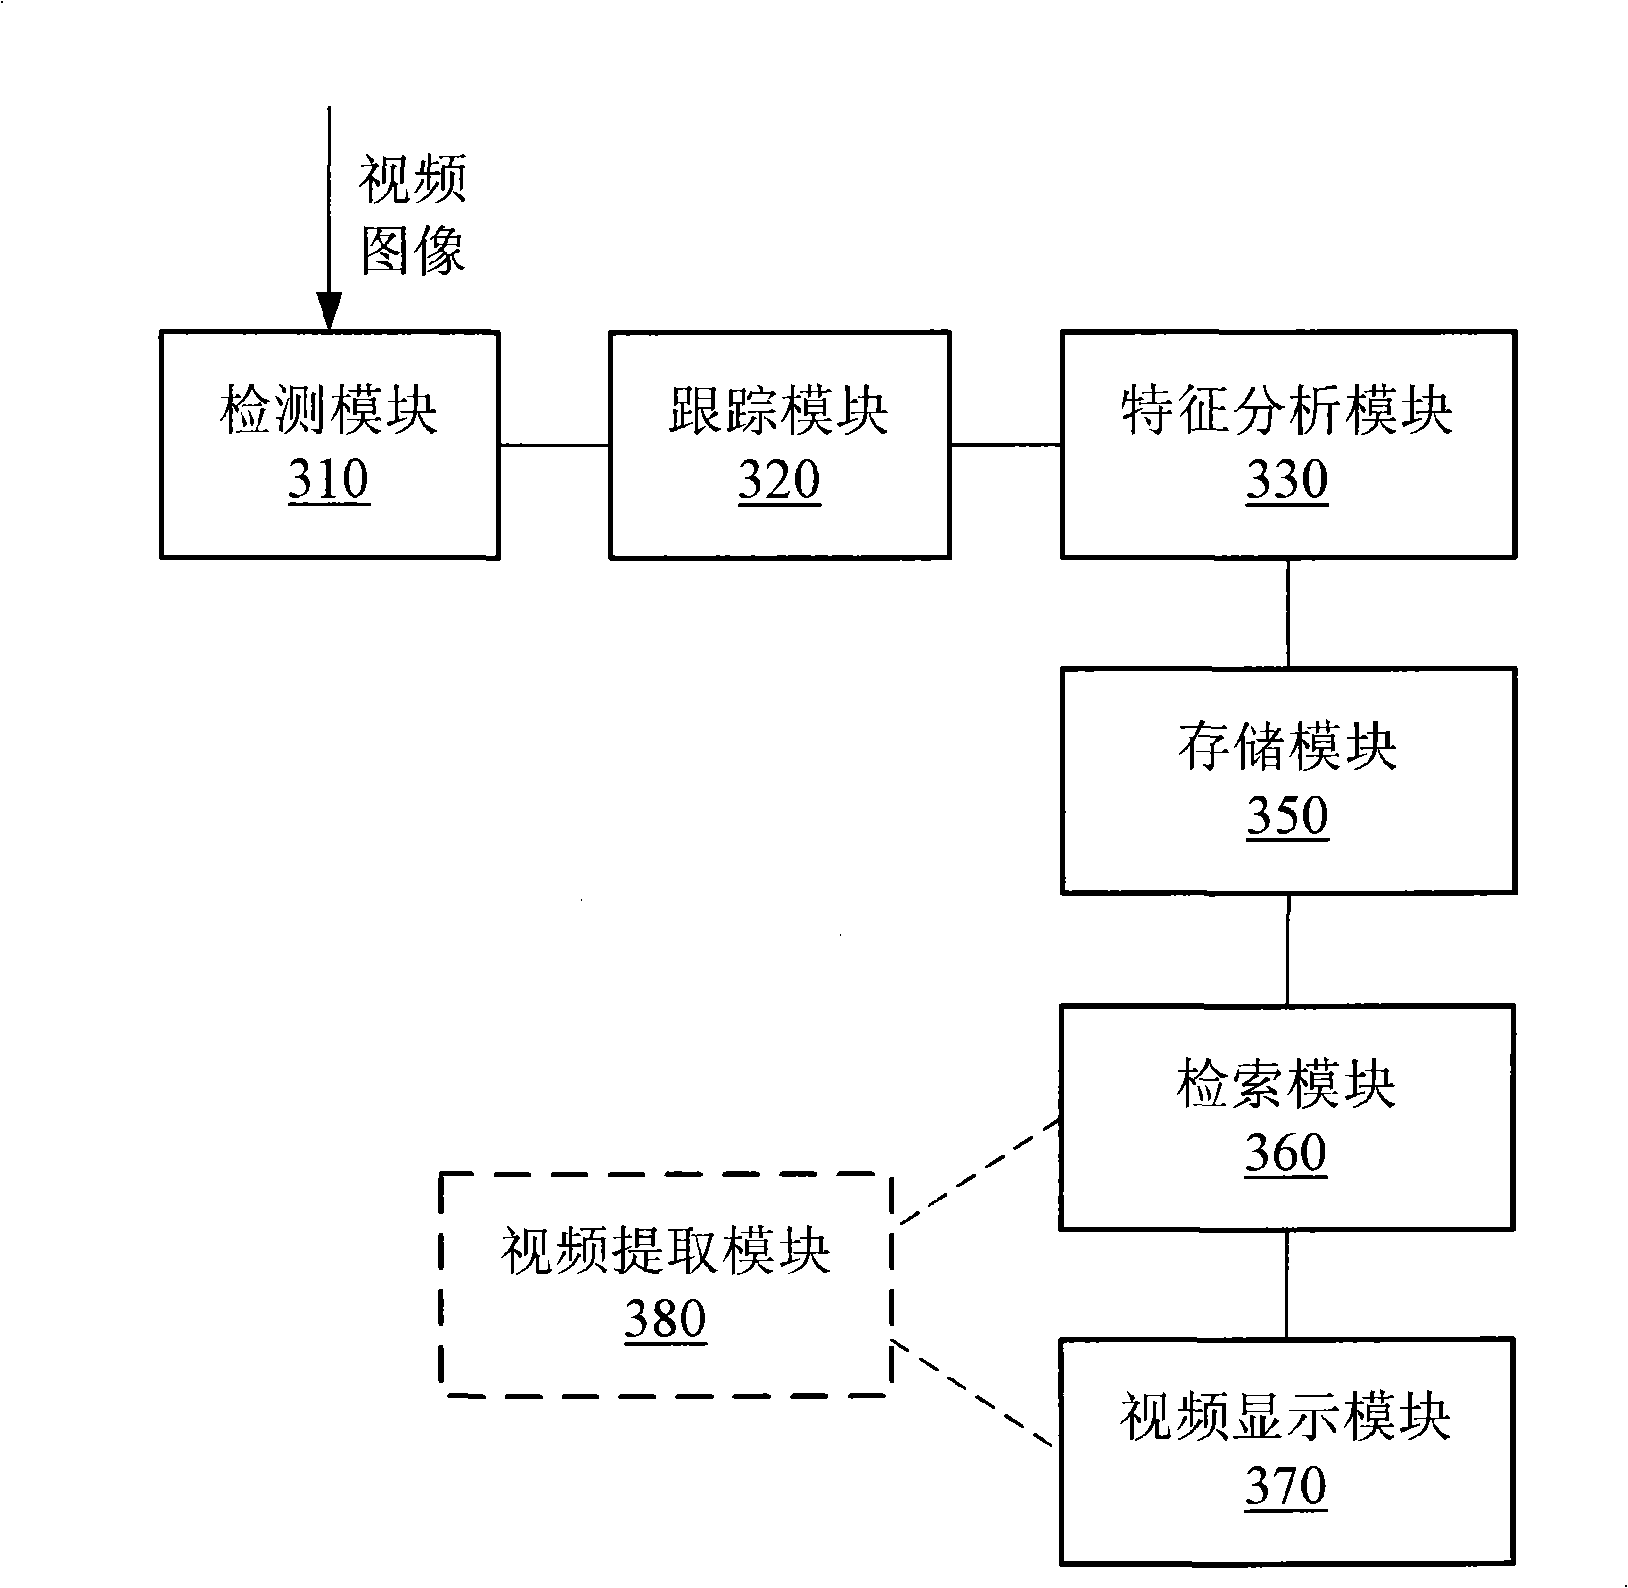 Method, system for analyzing, storing video as well as method, system for searching video